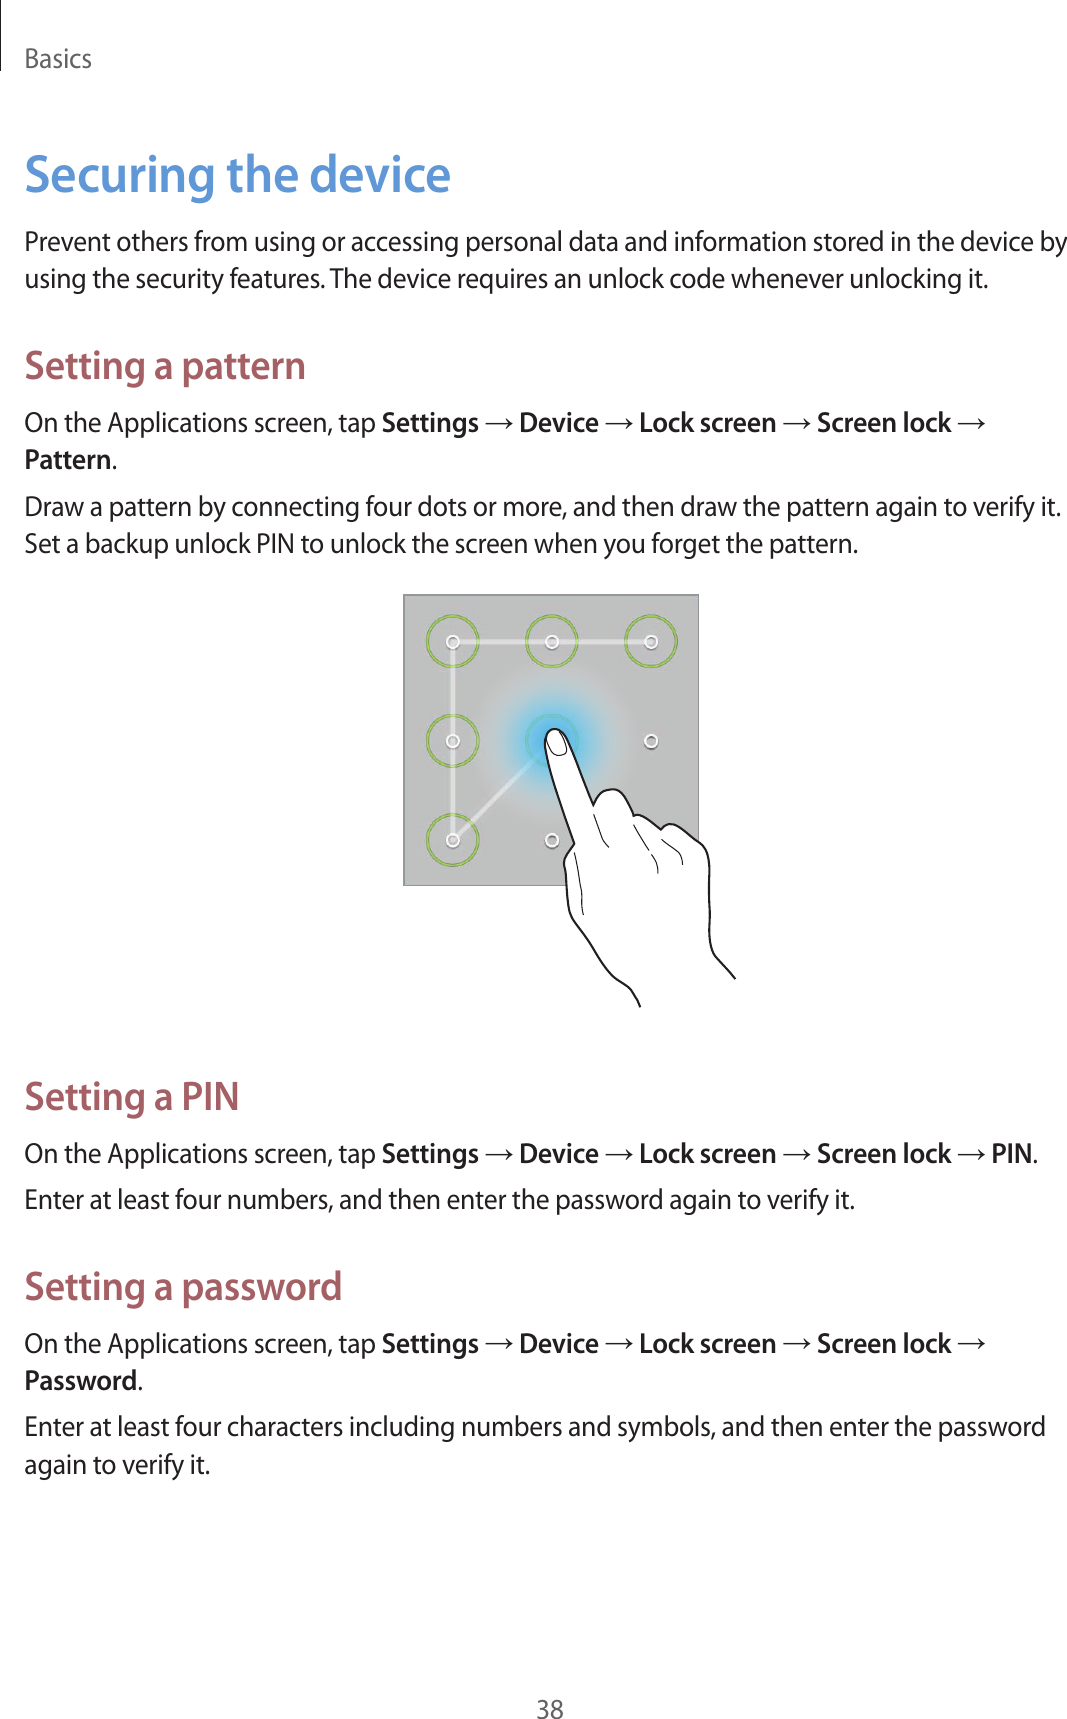 Basics38Securing the devicePrevent others from using or accessing personal data and information stored in the device by using the security features. The device requires an unlock code whenever unlocking it.Setting a patternOn the Applications screen, tap Settings → Device → Lock screen → Screen lock → Pattern.Draw a pattern by connecting four dots or more, and then draw the pattern again to verify it. Set a backup unlock PIN to unlock the screen when you forget the pattern.Setting a PINOn the Applications screen, tap Settings → Device → Lock screen → Screen lock → PIN.Enter at least four numbers, and then enter the password again to verify it.Setting a passwordOn the Applications screen, tap Settings → Device → Lock screen → Screen lock → Password.Enter at least four characters including numbers and symbols, and then enter the password again to verify it.